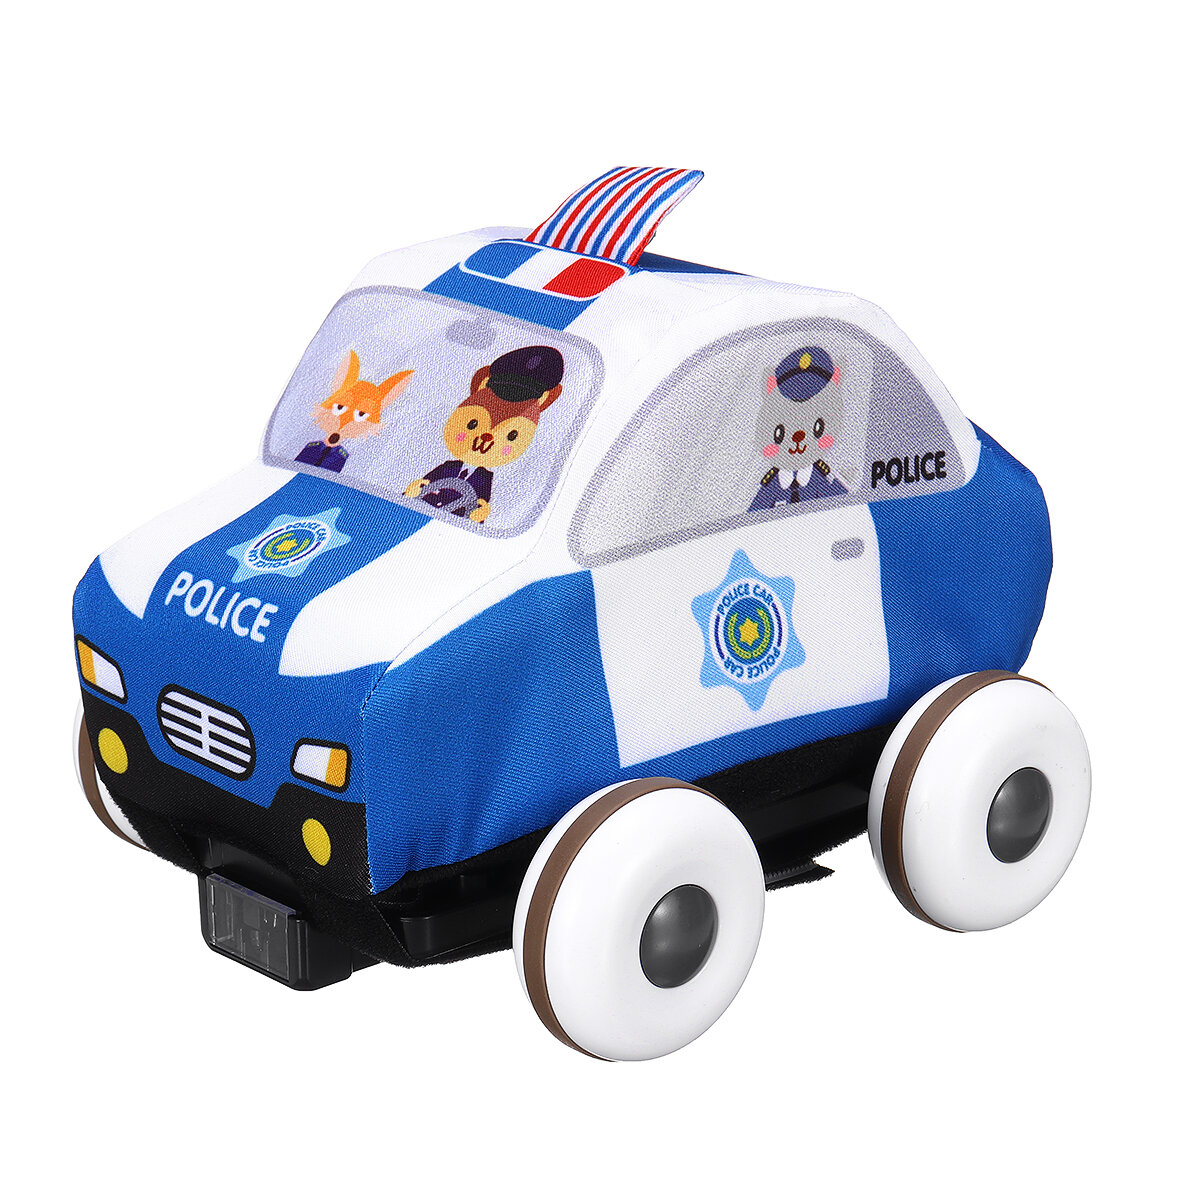 6pcs/box School Bus Fire Truck Ambulance Police Car With Crawling Mat Toys Model for Children Christ